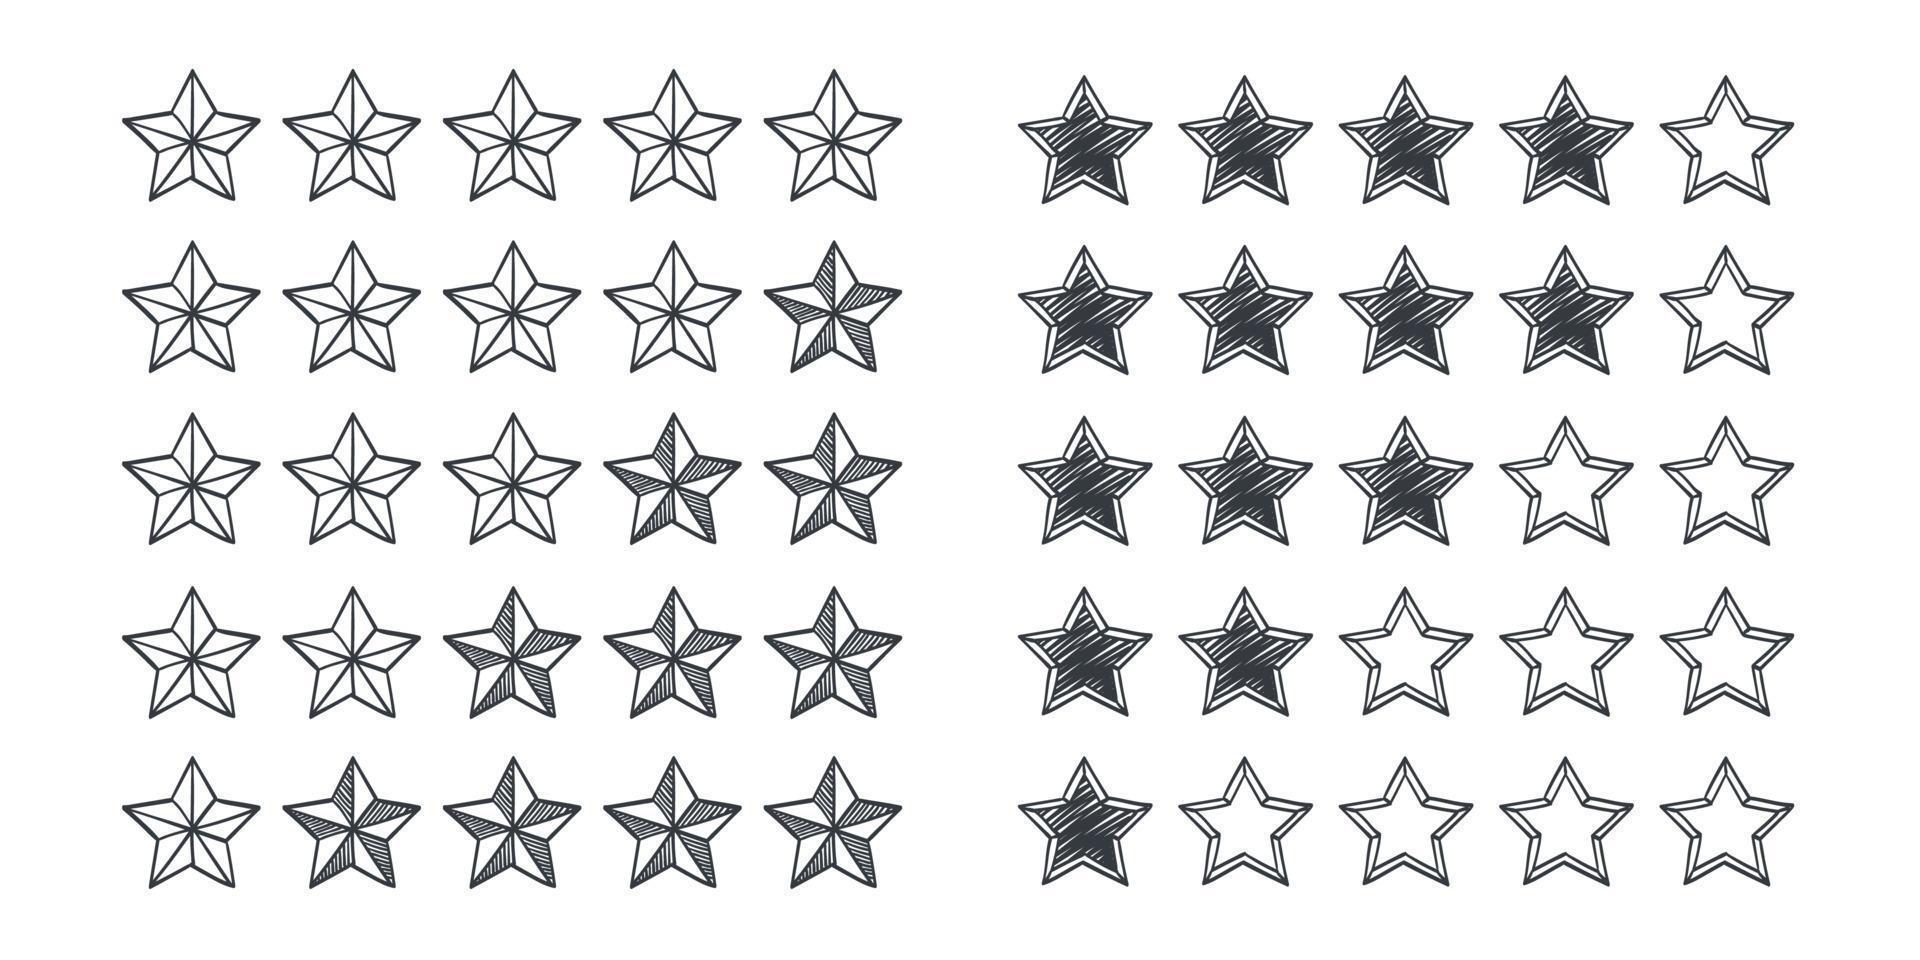 Quality rating signs. Stars icons concept. Drawn icons of stars. Vector illustration